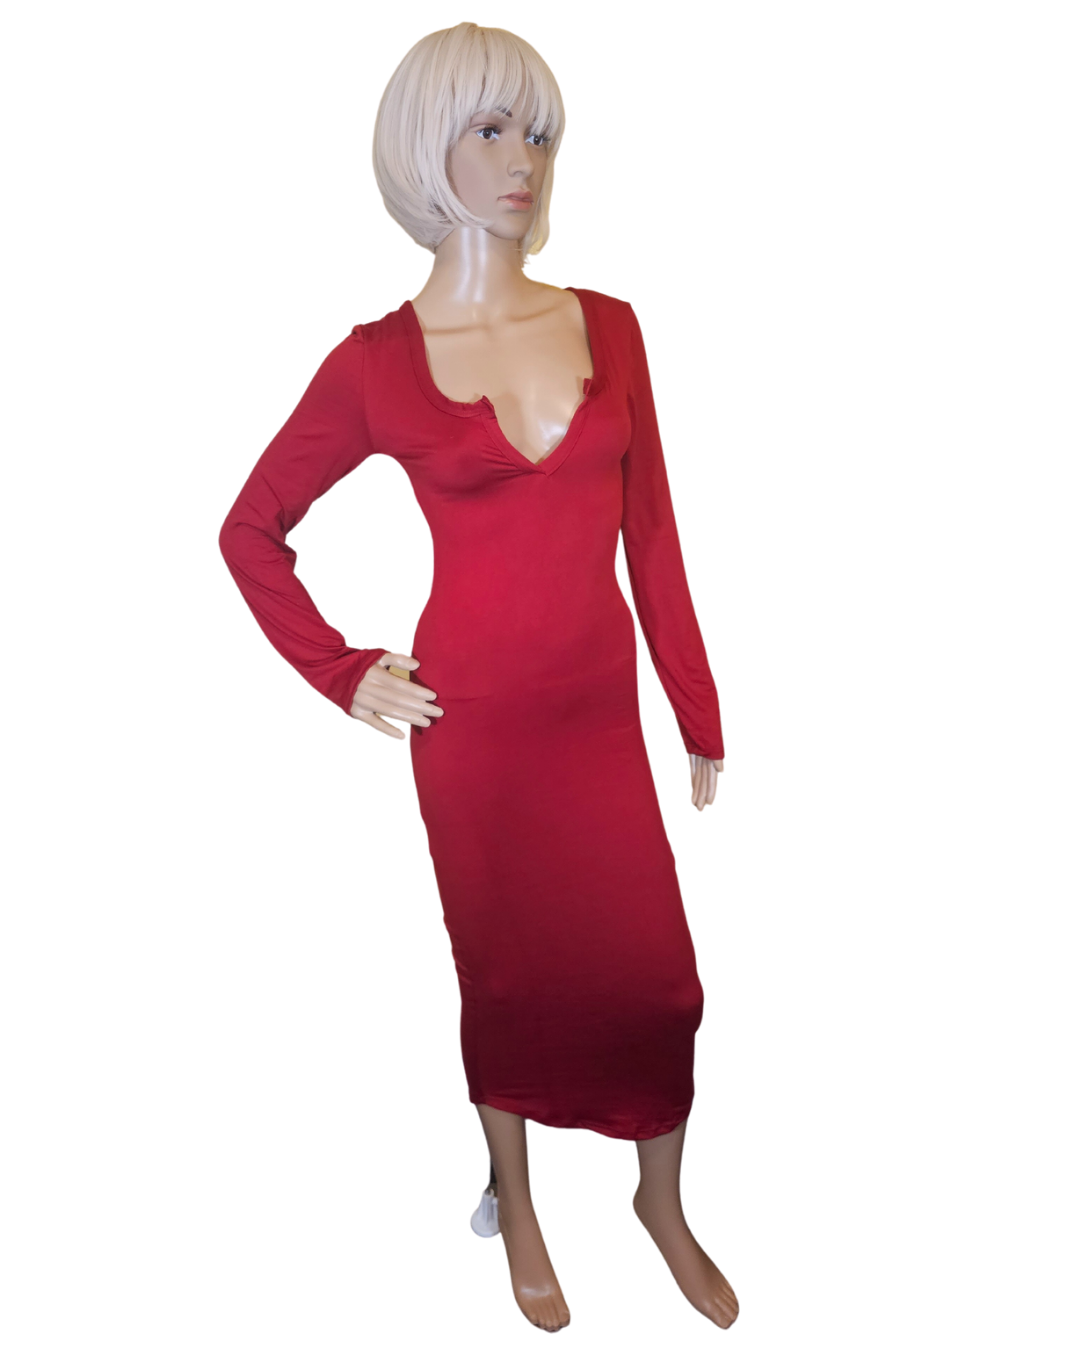 small-large, red soft material dress that fits your curves and has a v-neck in the front. the dress goes pass your knees. long sleeves